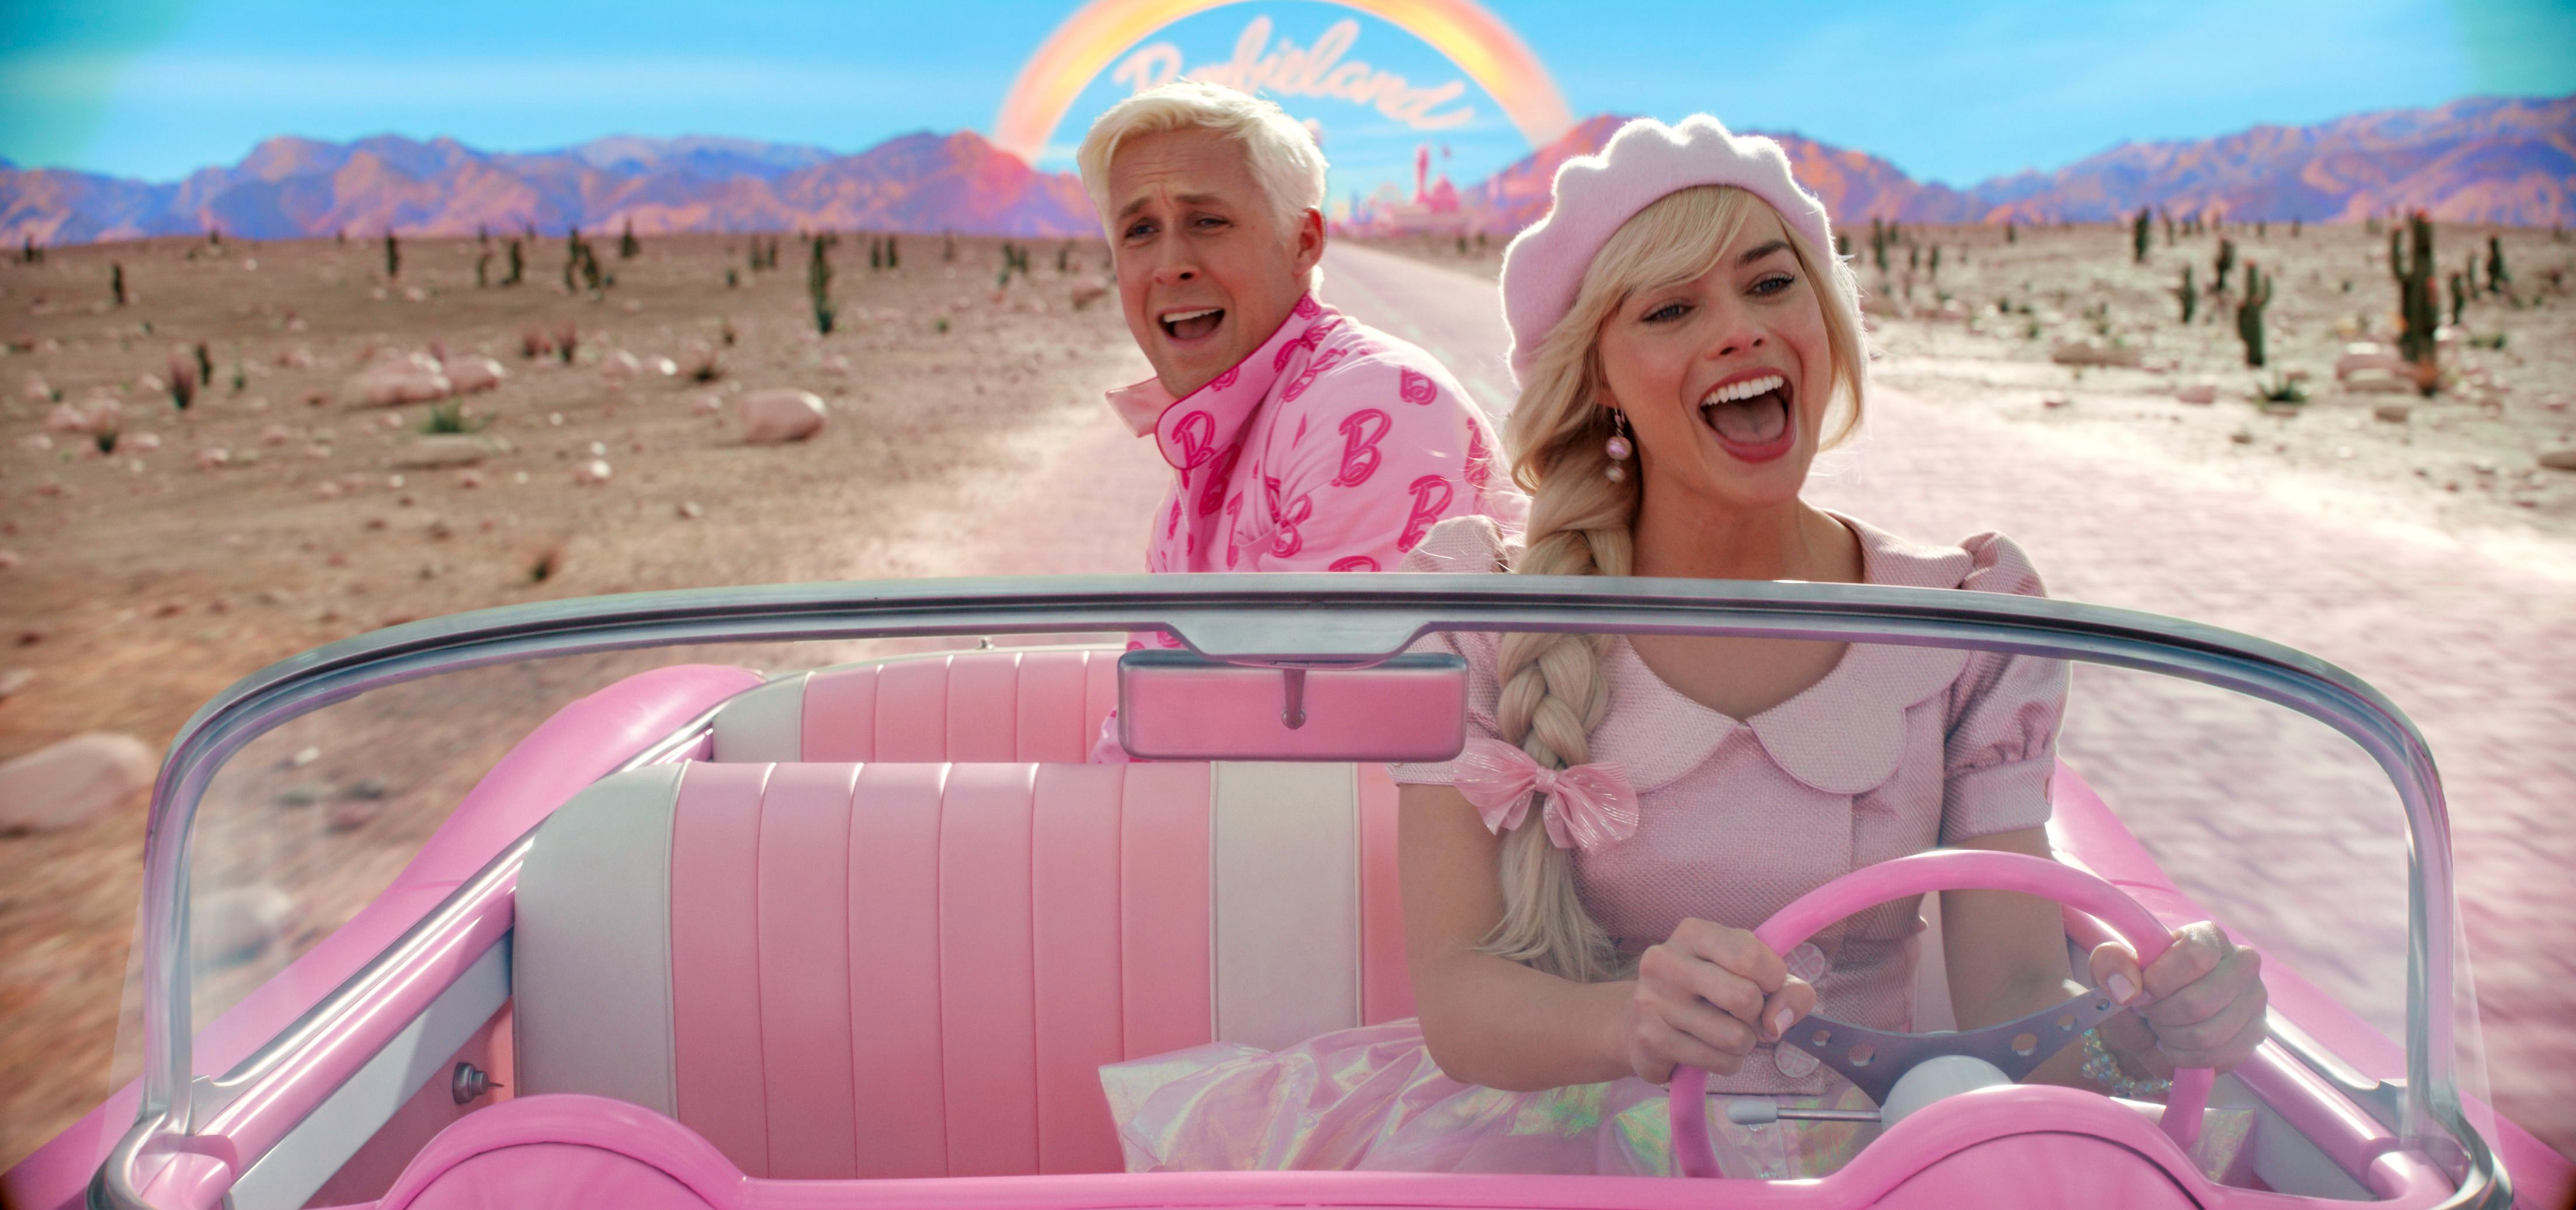 Ryan Gosling and Margot Robbie as Ken and Barbie in a scene from "Barbie." They're driving through a desert in a pink convertible, singing a song.